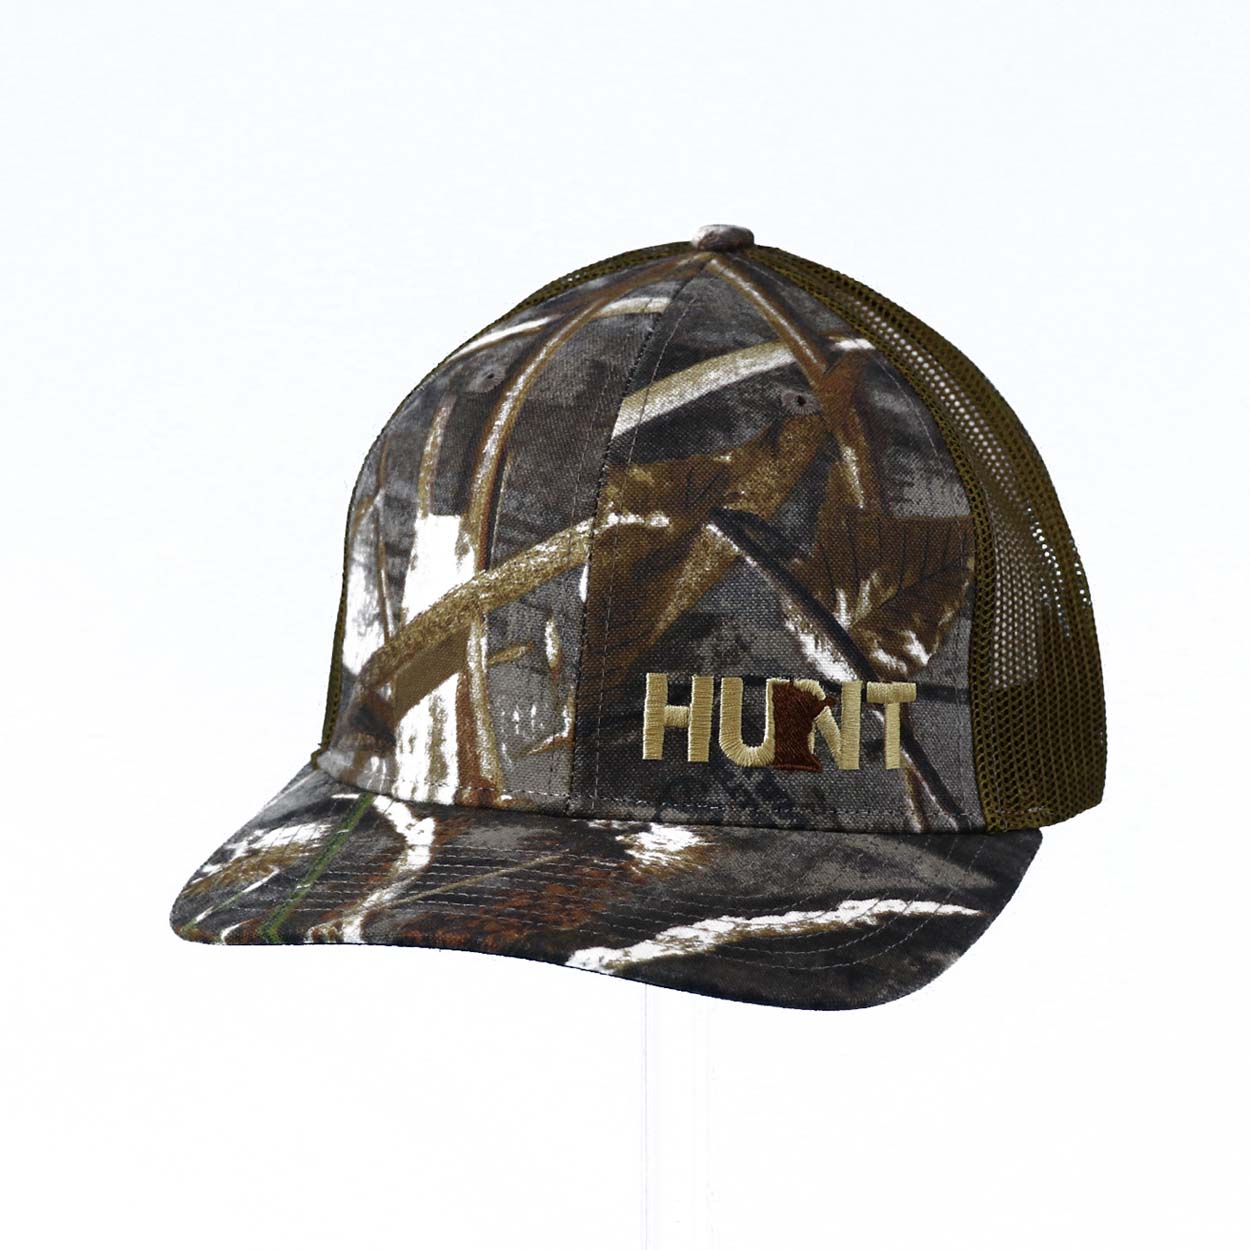 Hunt Minnesota Night Out Embroidered Snapback Trucker Hat Realtree Camo Brown/Khaki